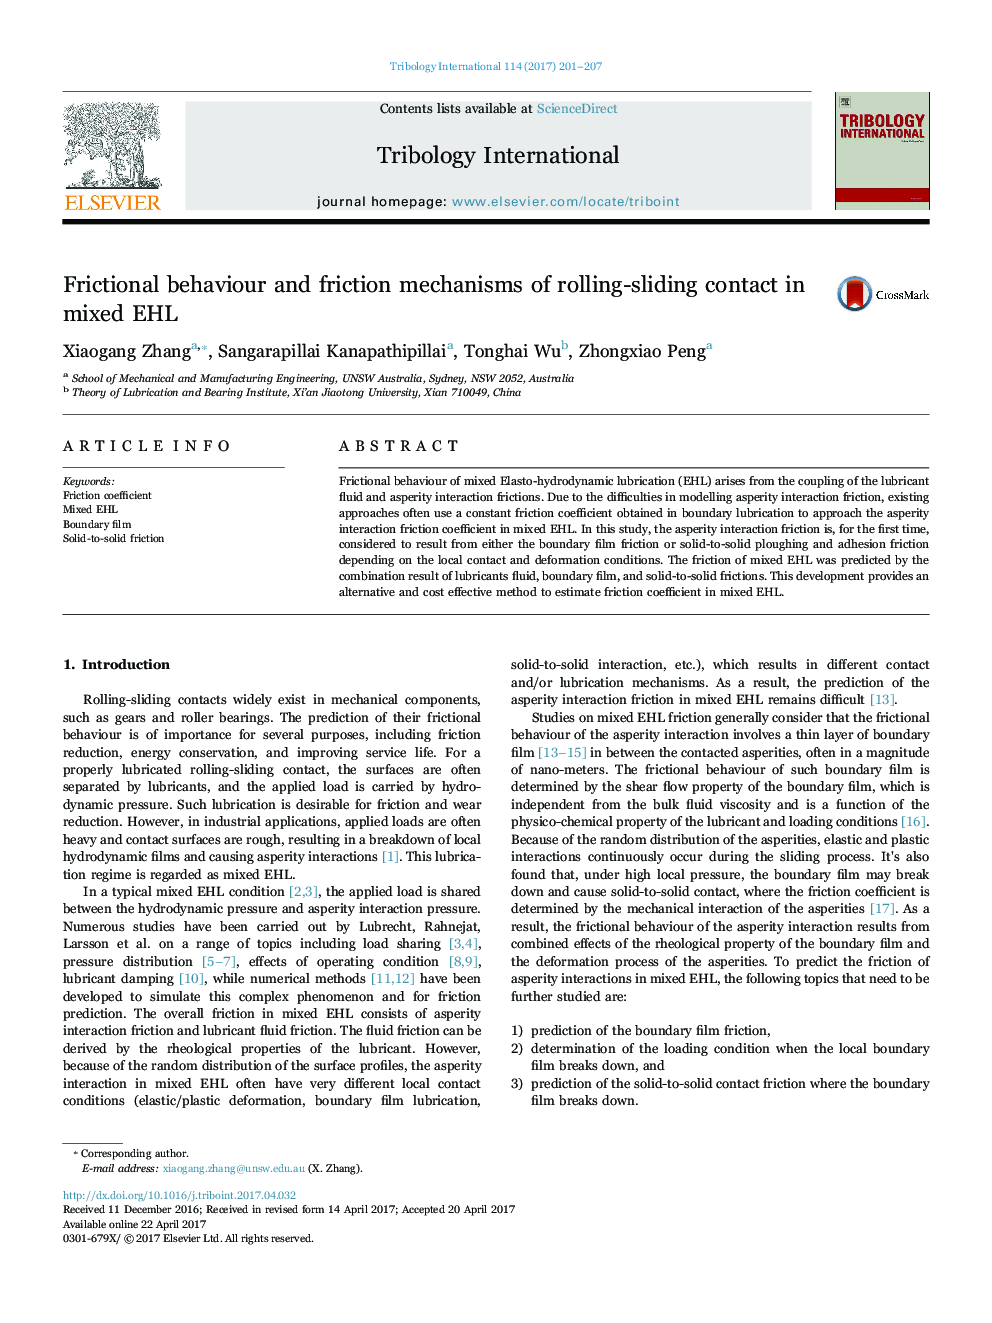 Frictional behaviour and friction mechanisms of rolling-sliding contact in mixed EHL